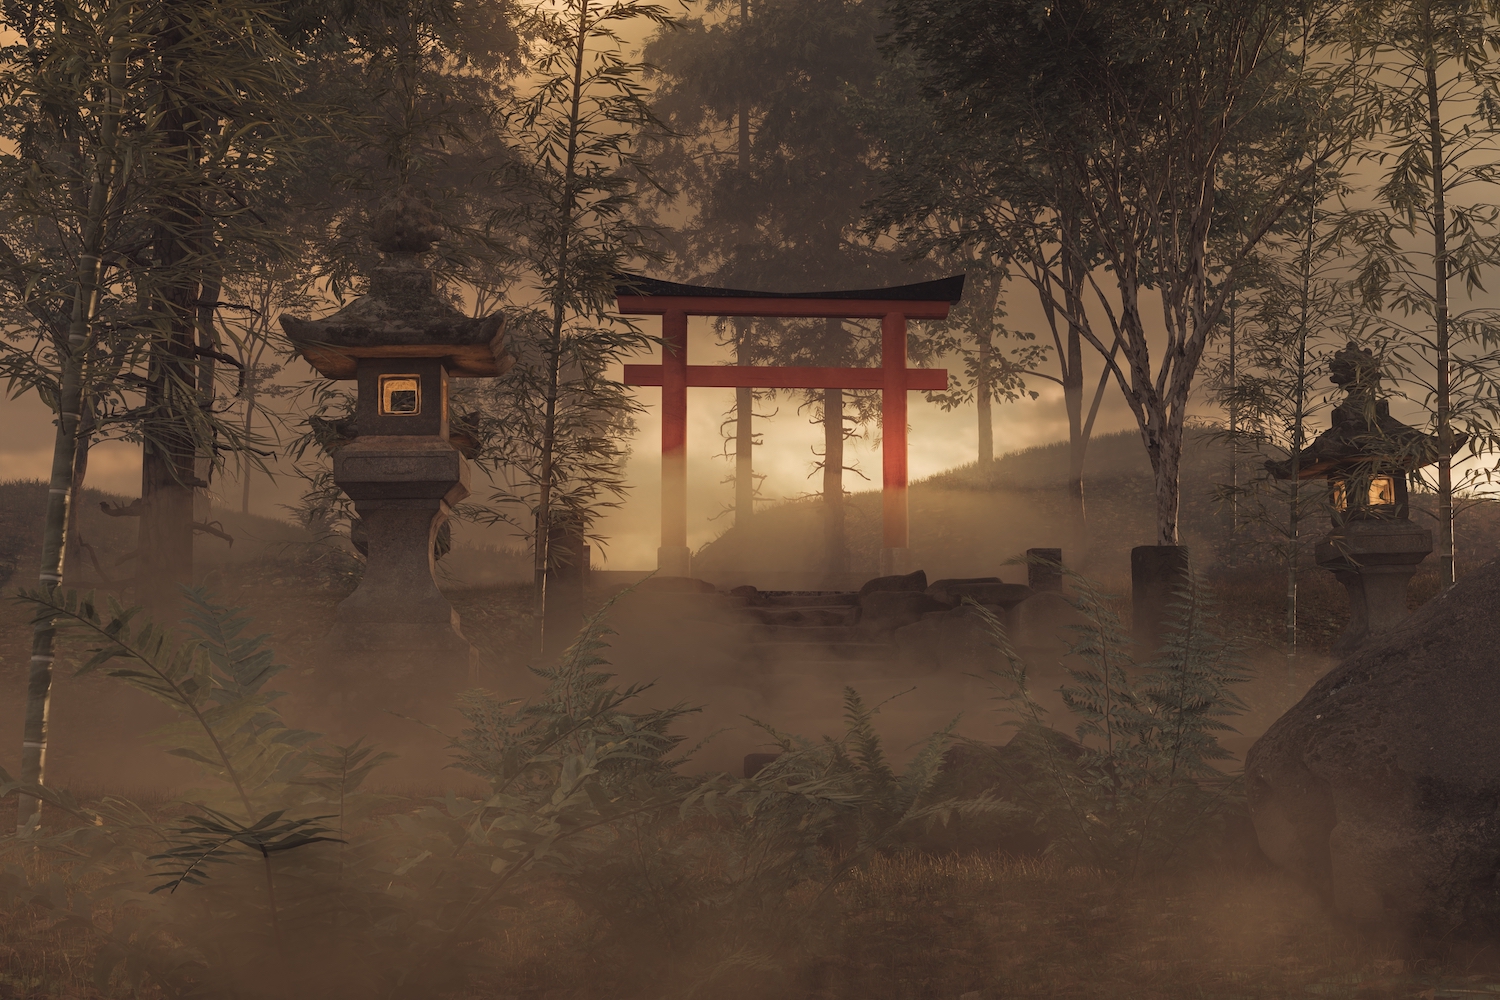 3d rendering of an old Japanese shrine with Torii gate and stone lantern in the evening light